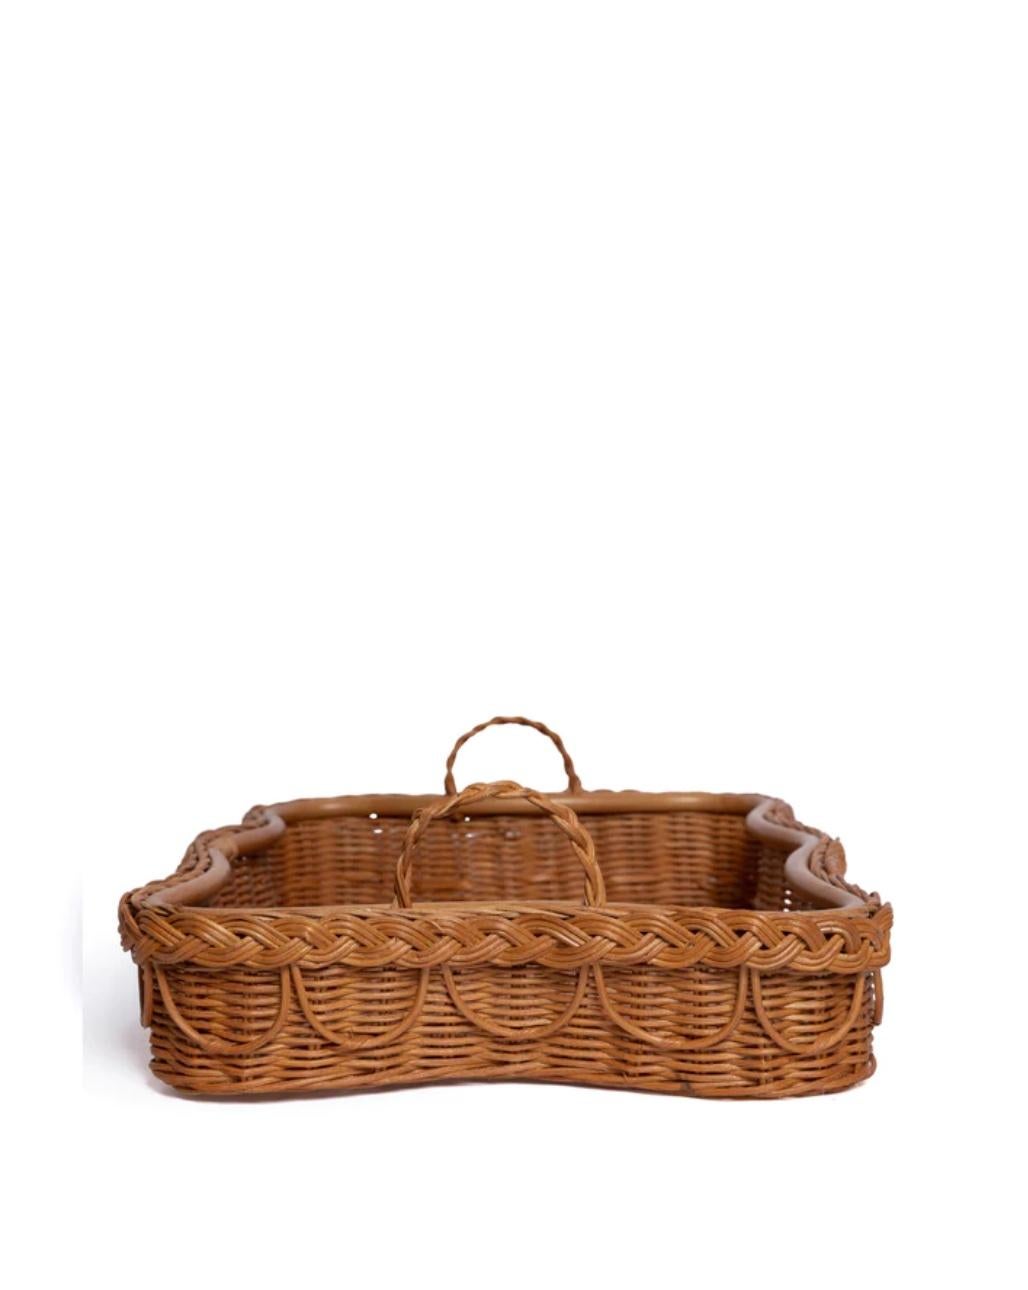 Indonesian Hadley Rattan Scalloped Tray, Natural Honey, Modern, Rustic by Louise Roe